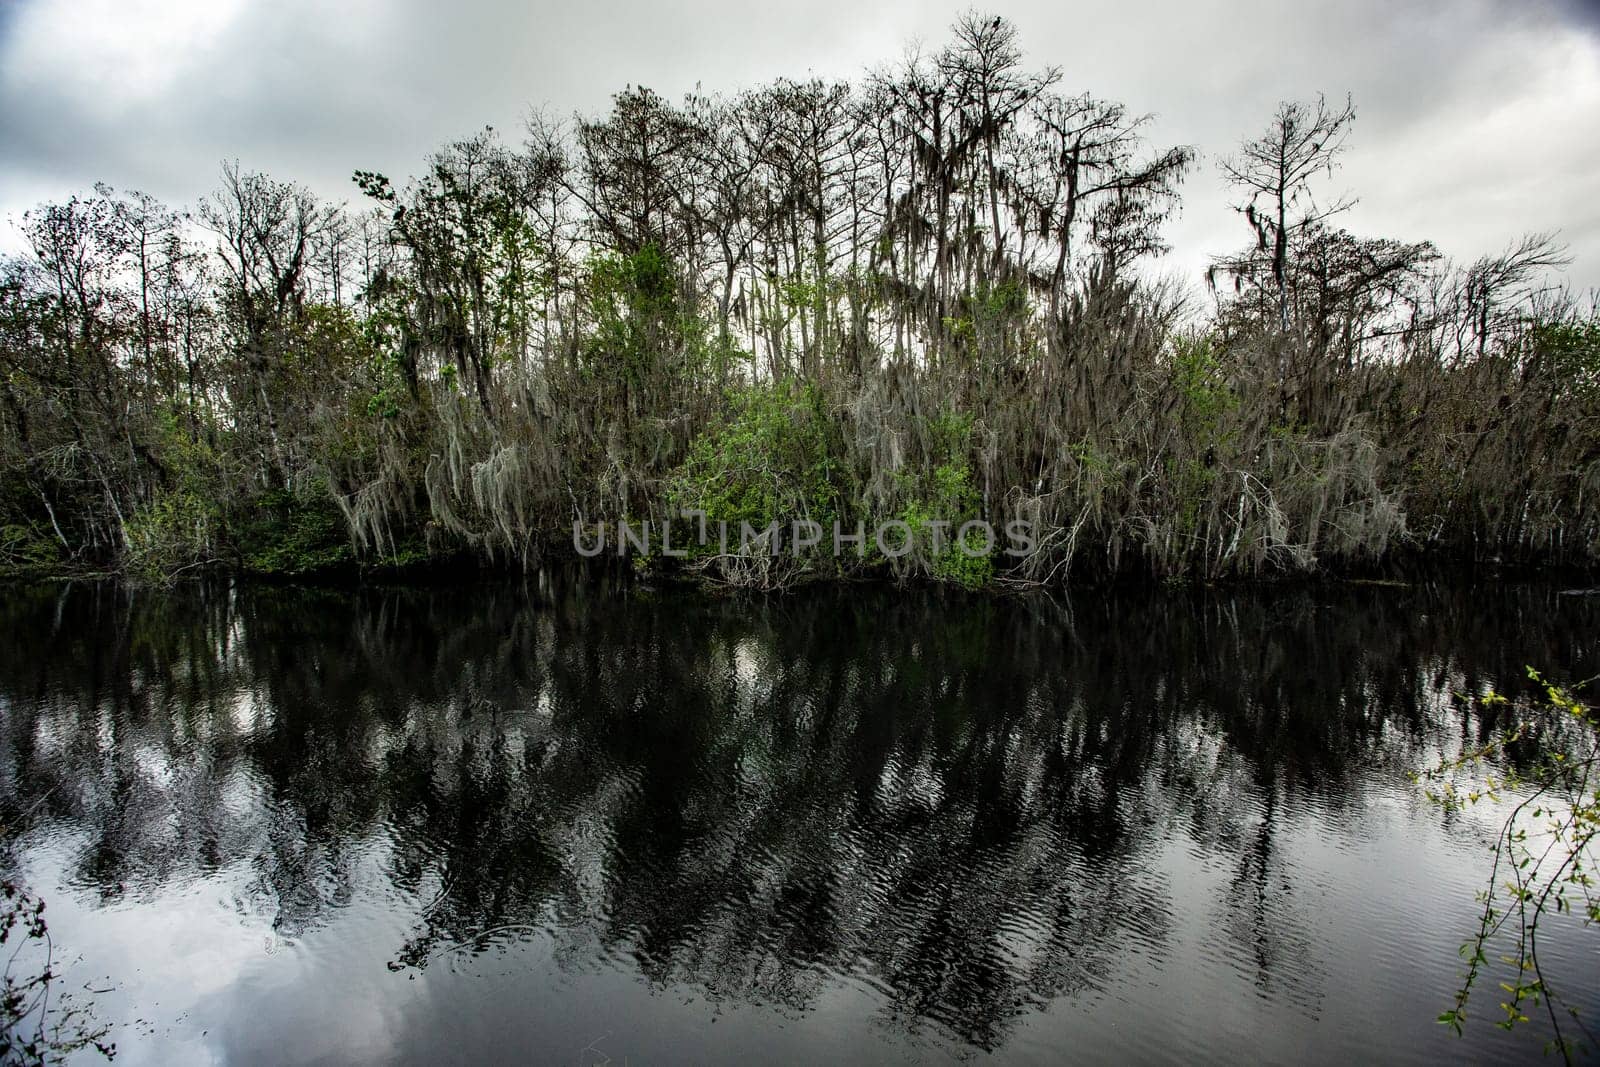 Cypress trees with a dramatic look and mirrored relection